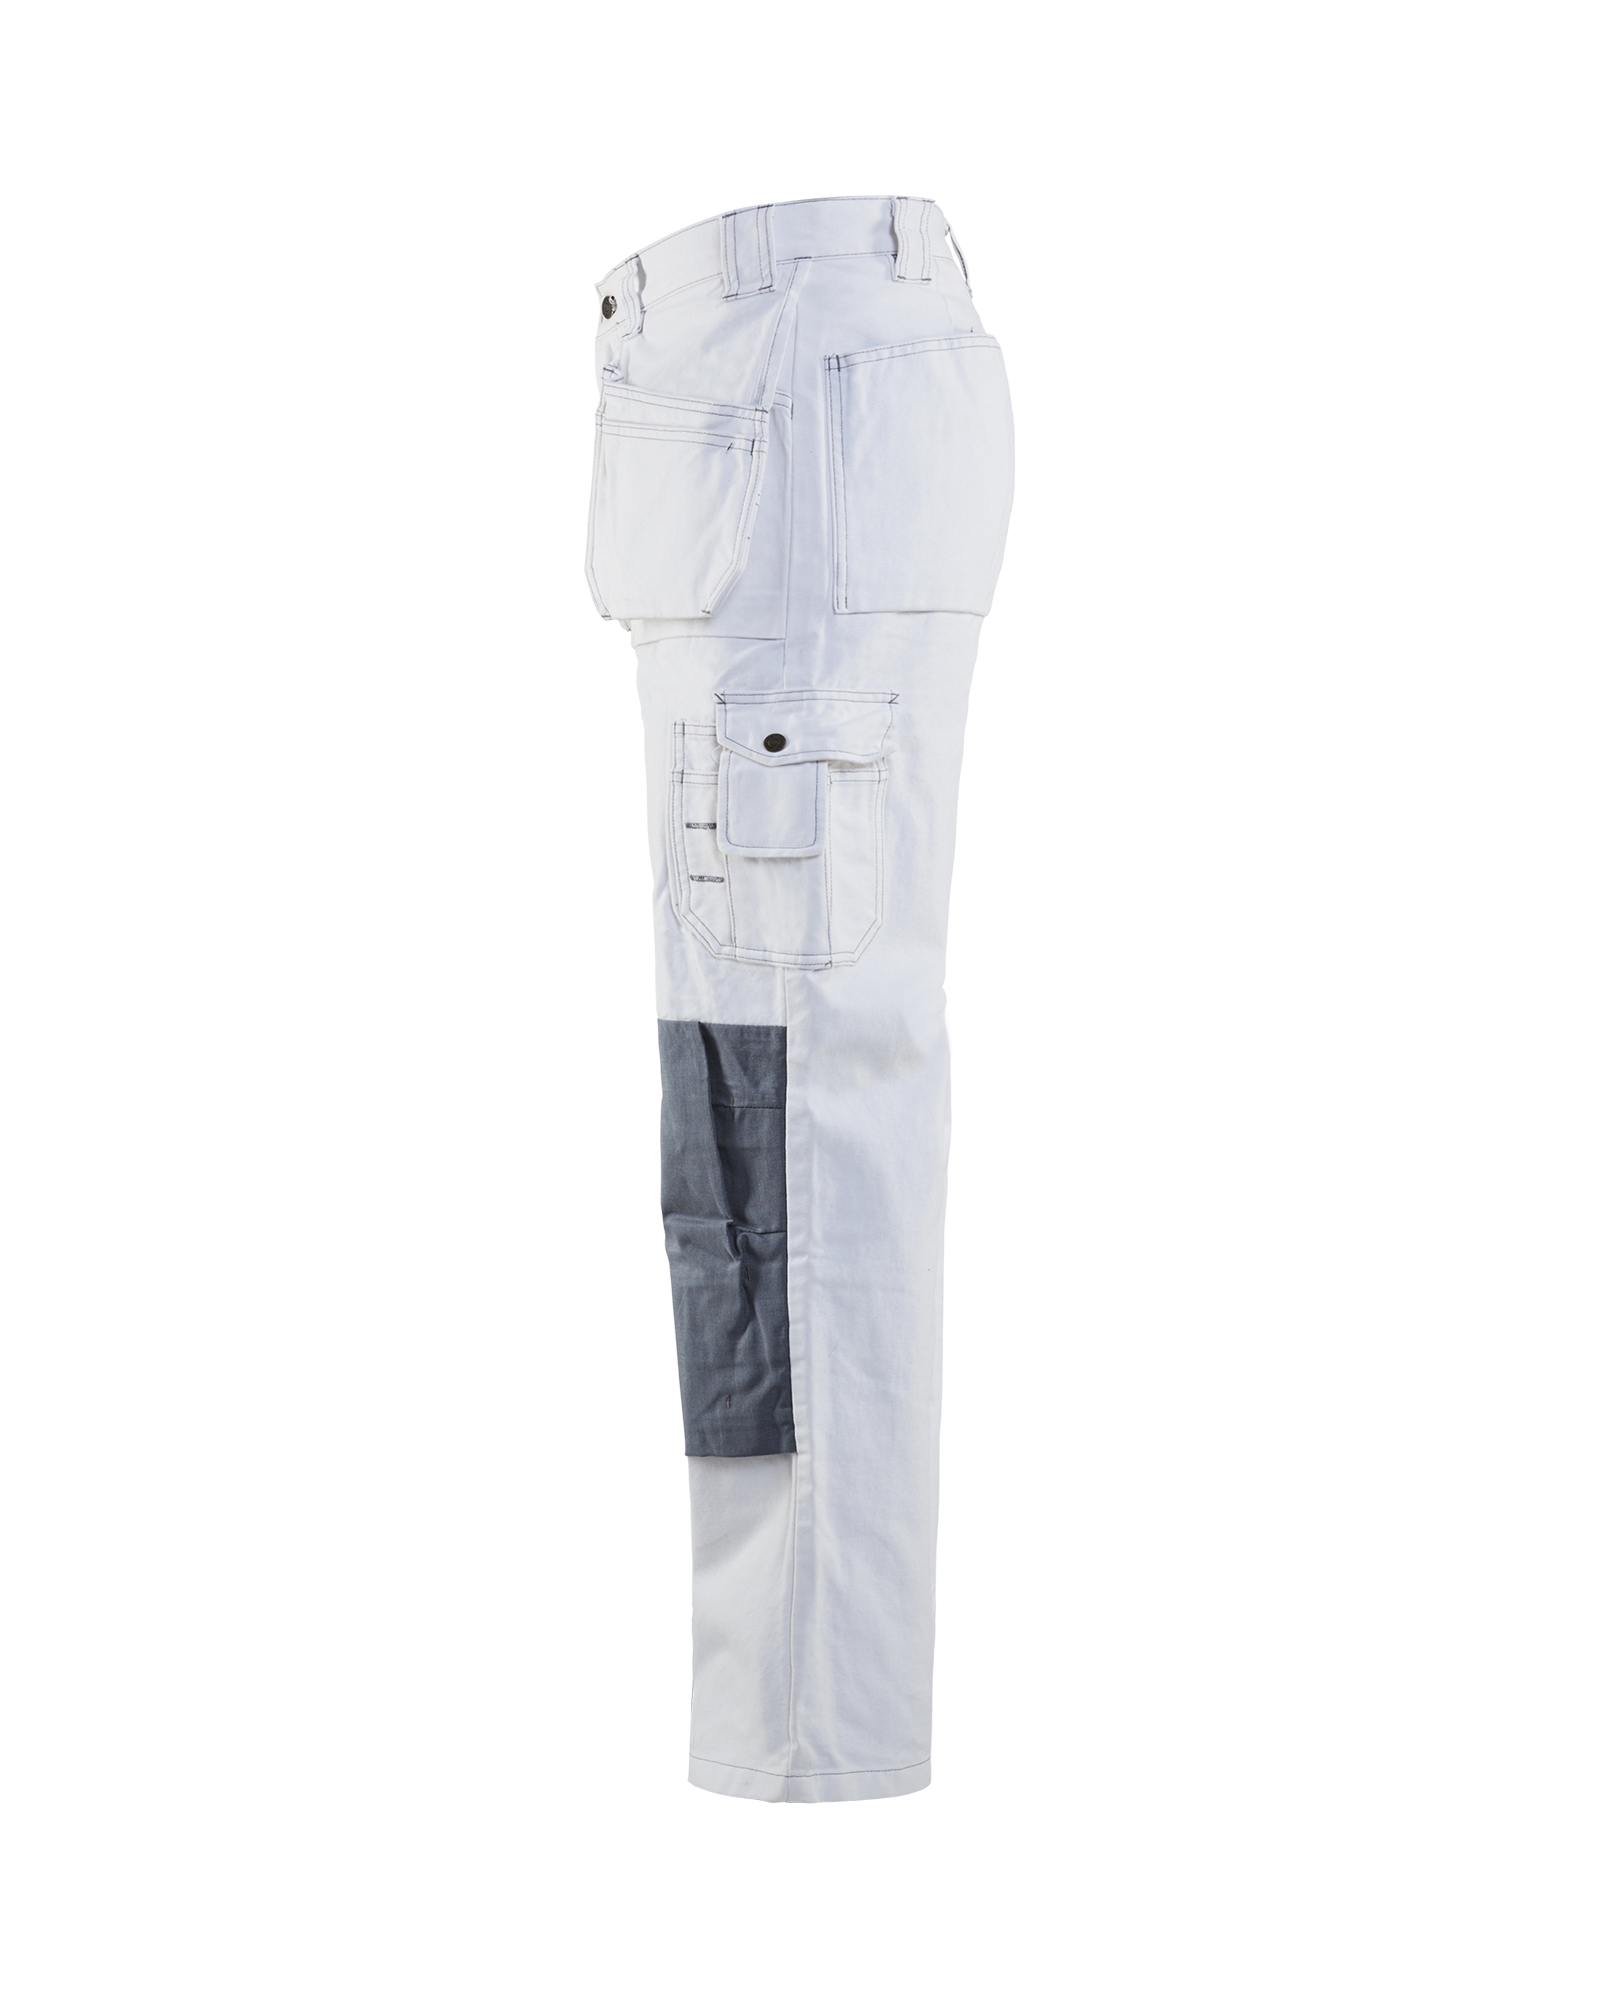 Hard Wearing Trade Professional Painters Decorators White Work Shorts Trousers 